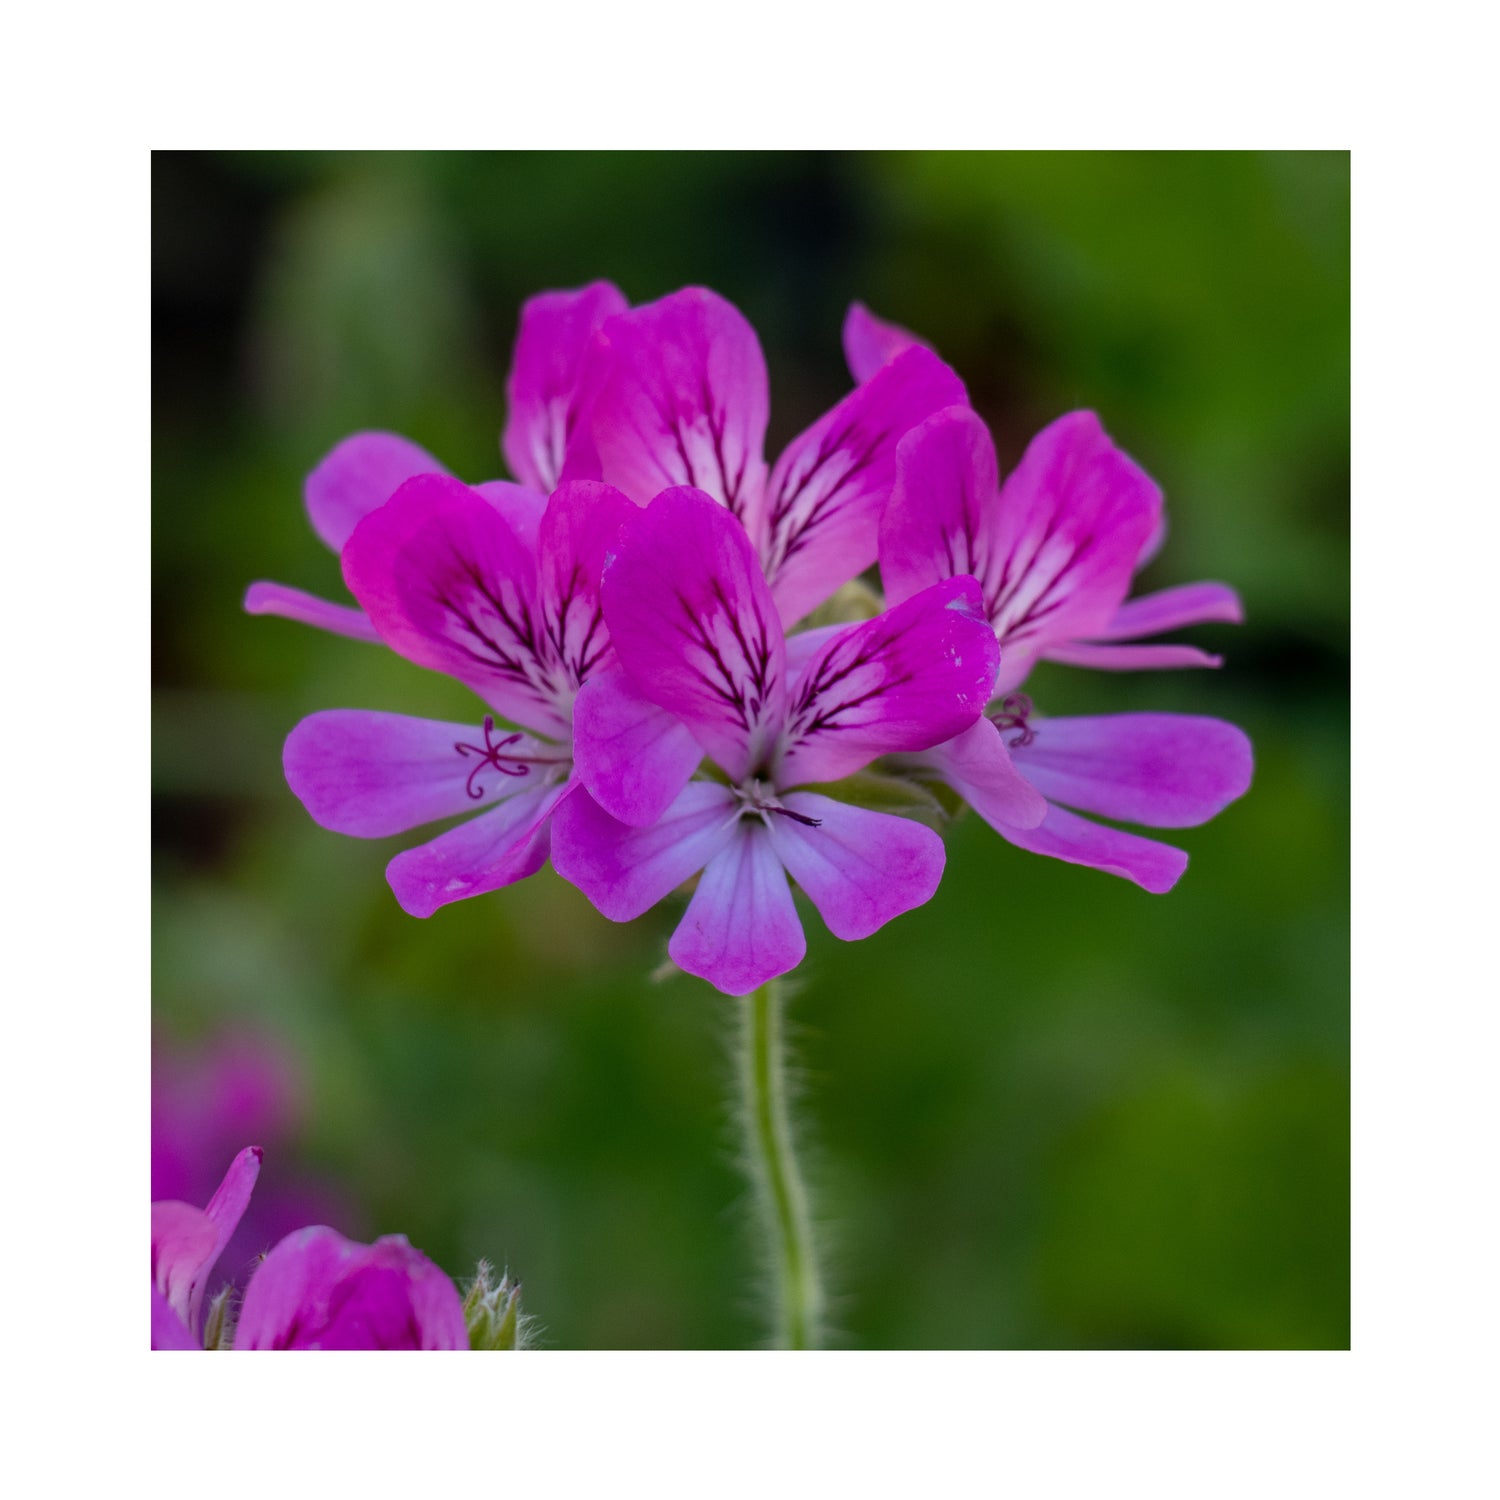 Scented Geranium, 6 mixed starter plants - Stunning Flowers with Scented Foliage